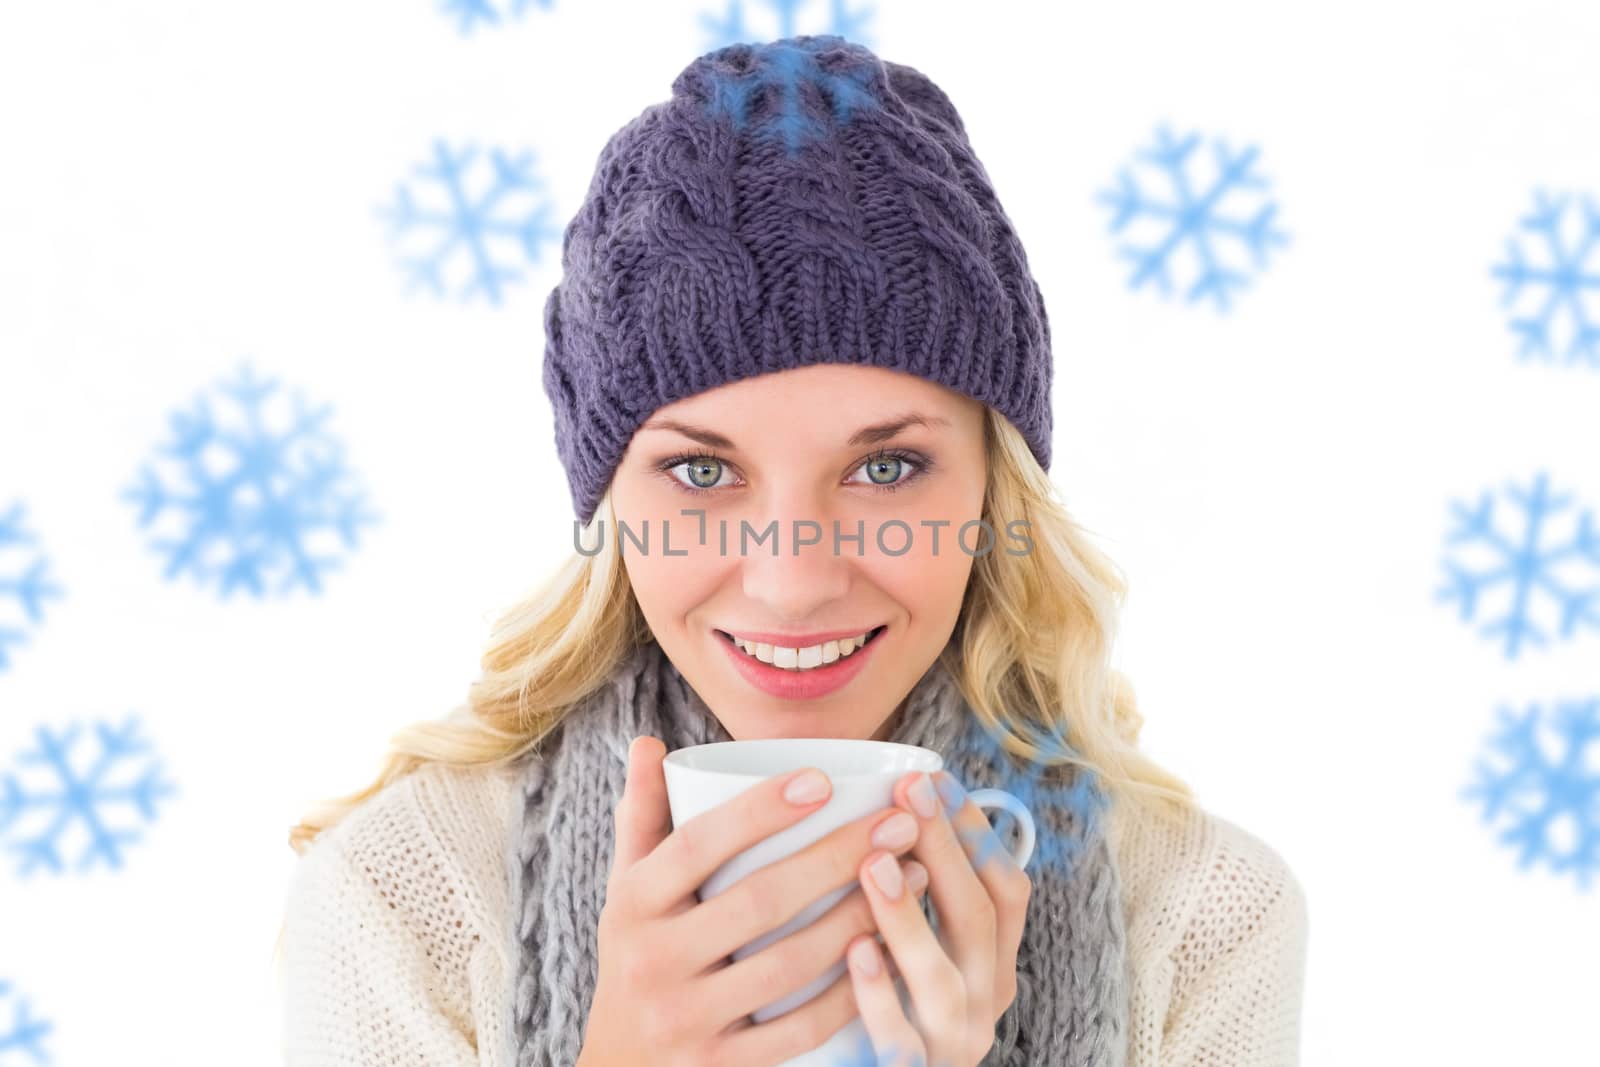 Pretty blonde in winter fashion holding mug against snowflakes